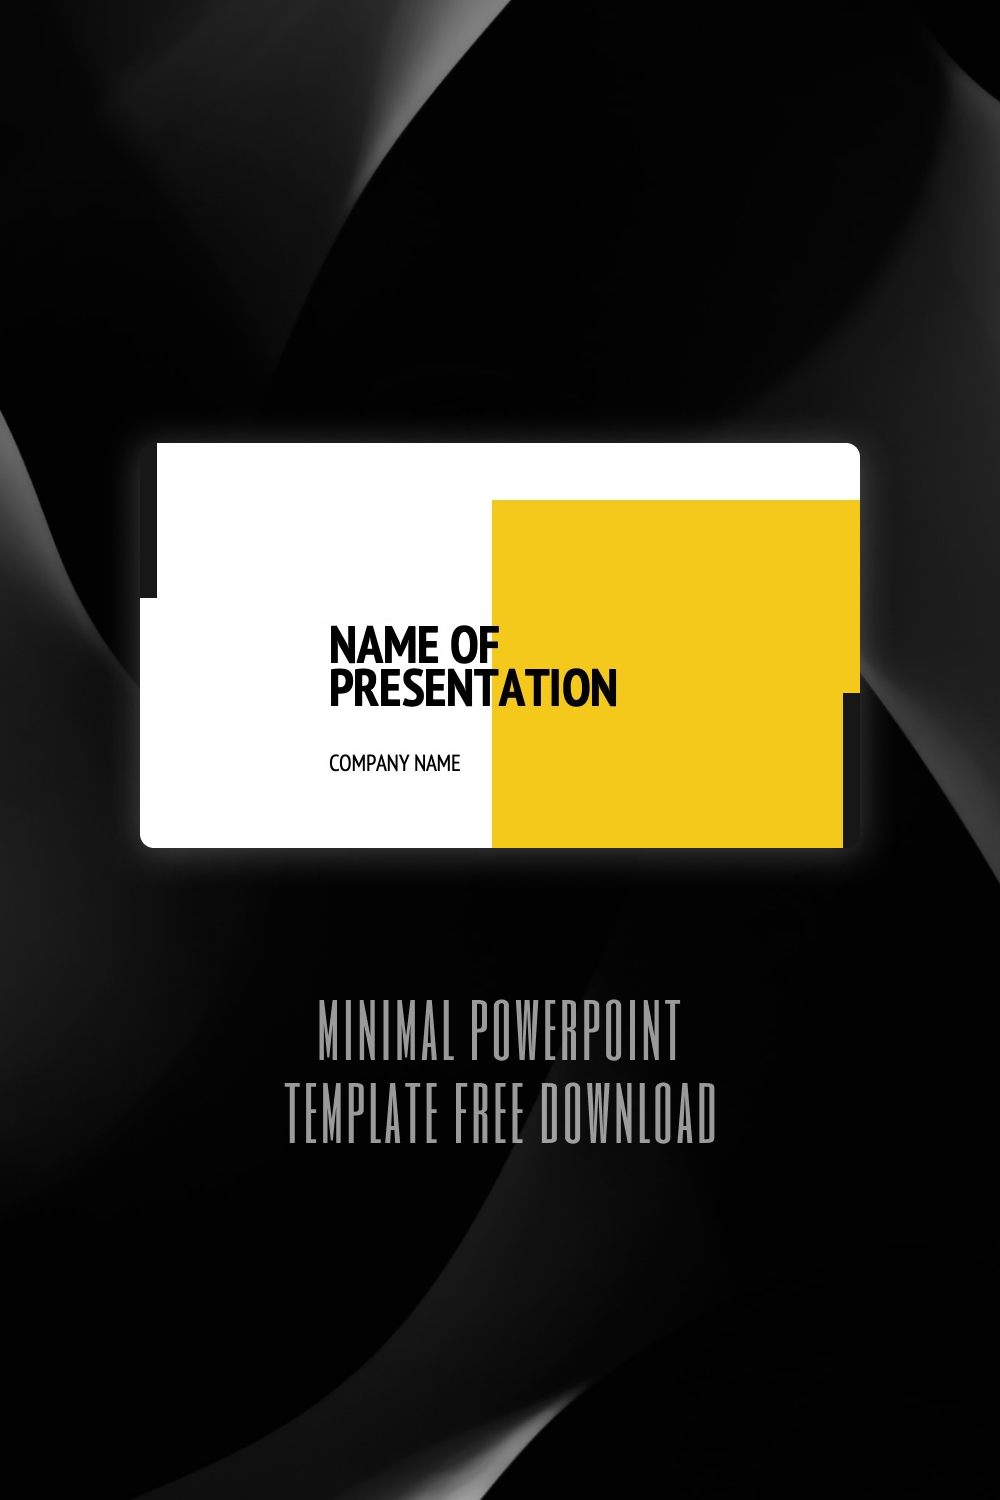 Minimal powerpoint template free download of pinterest.